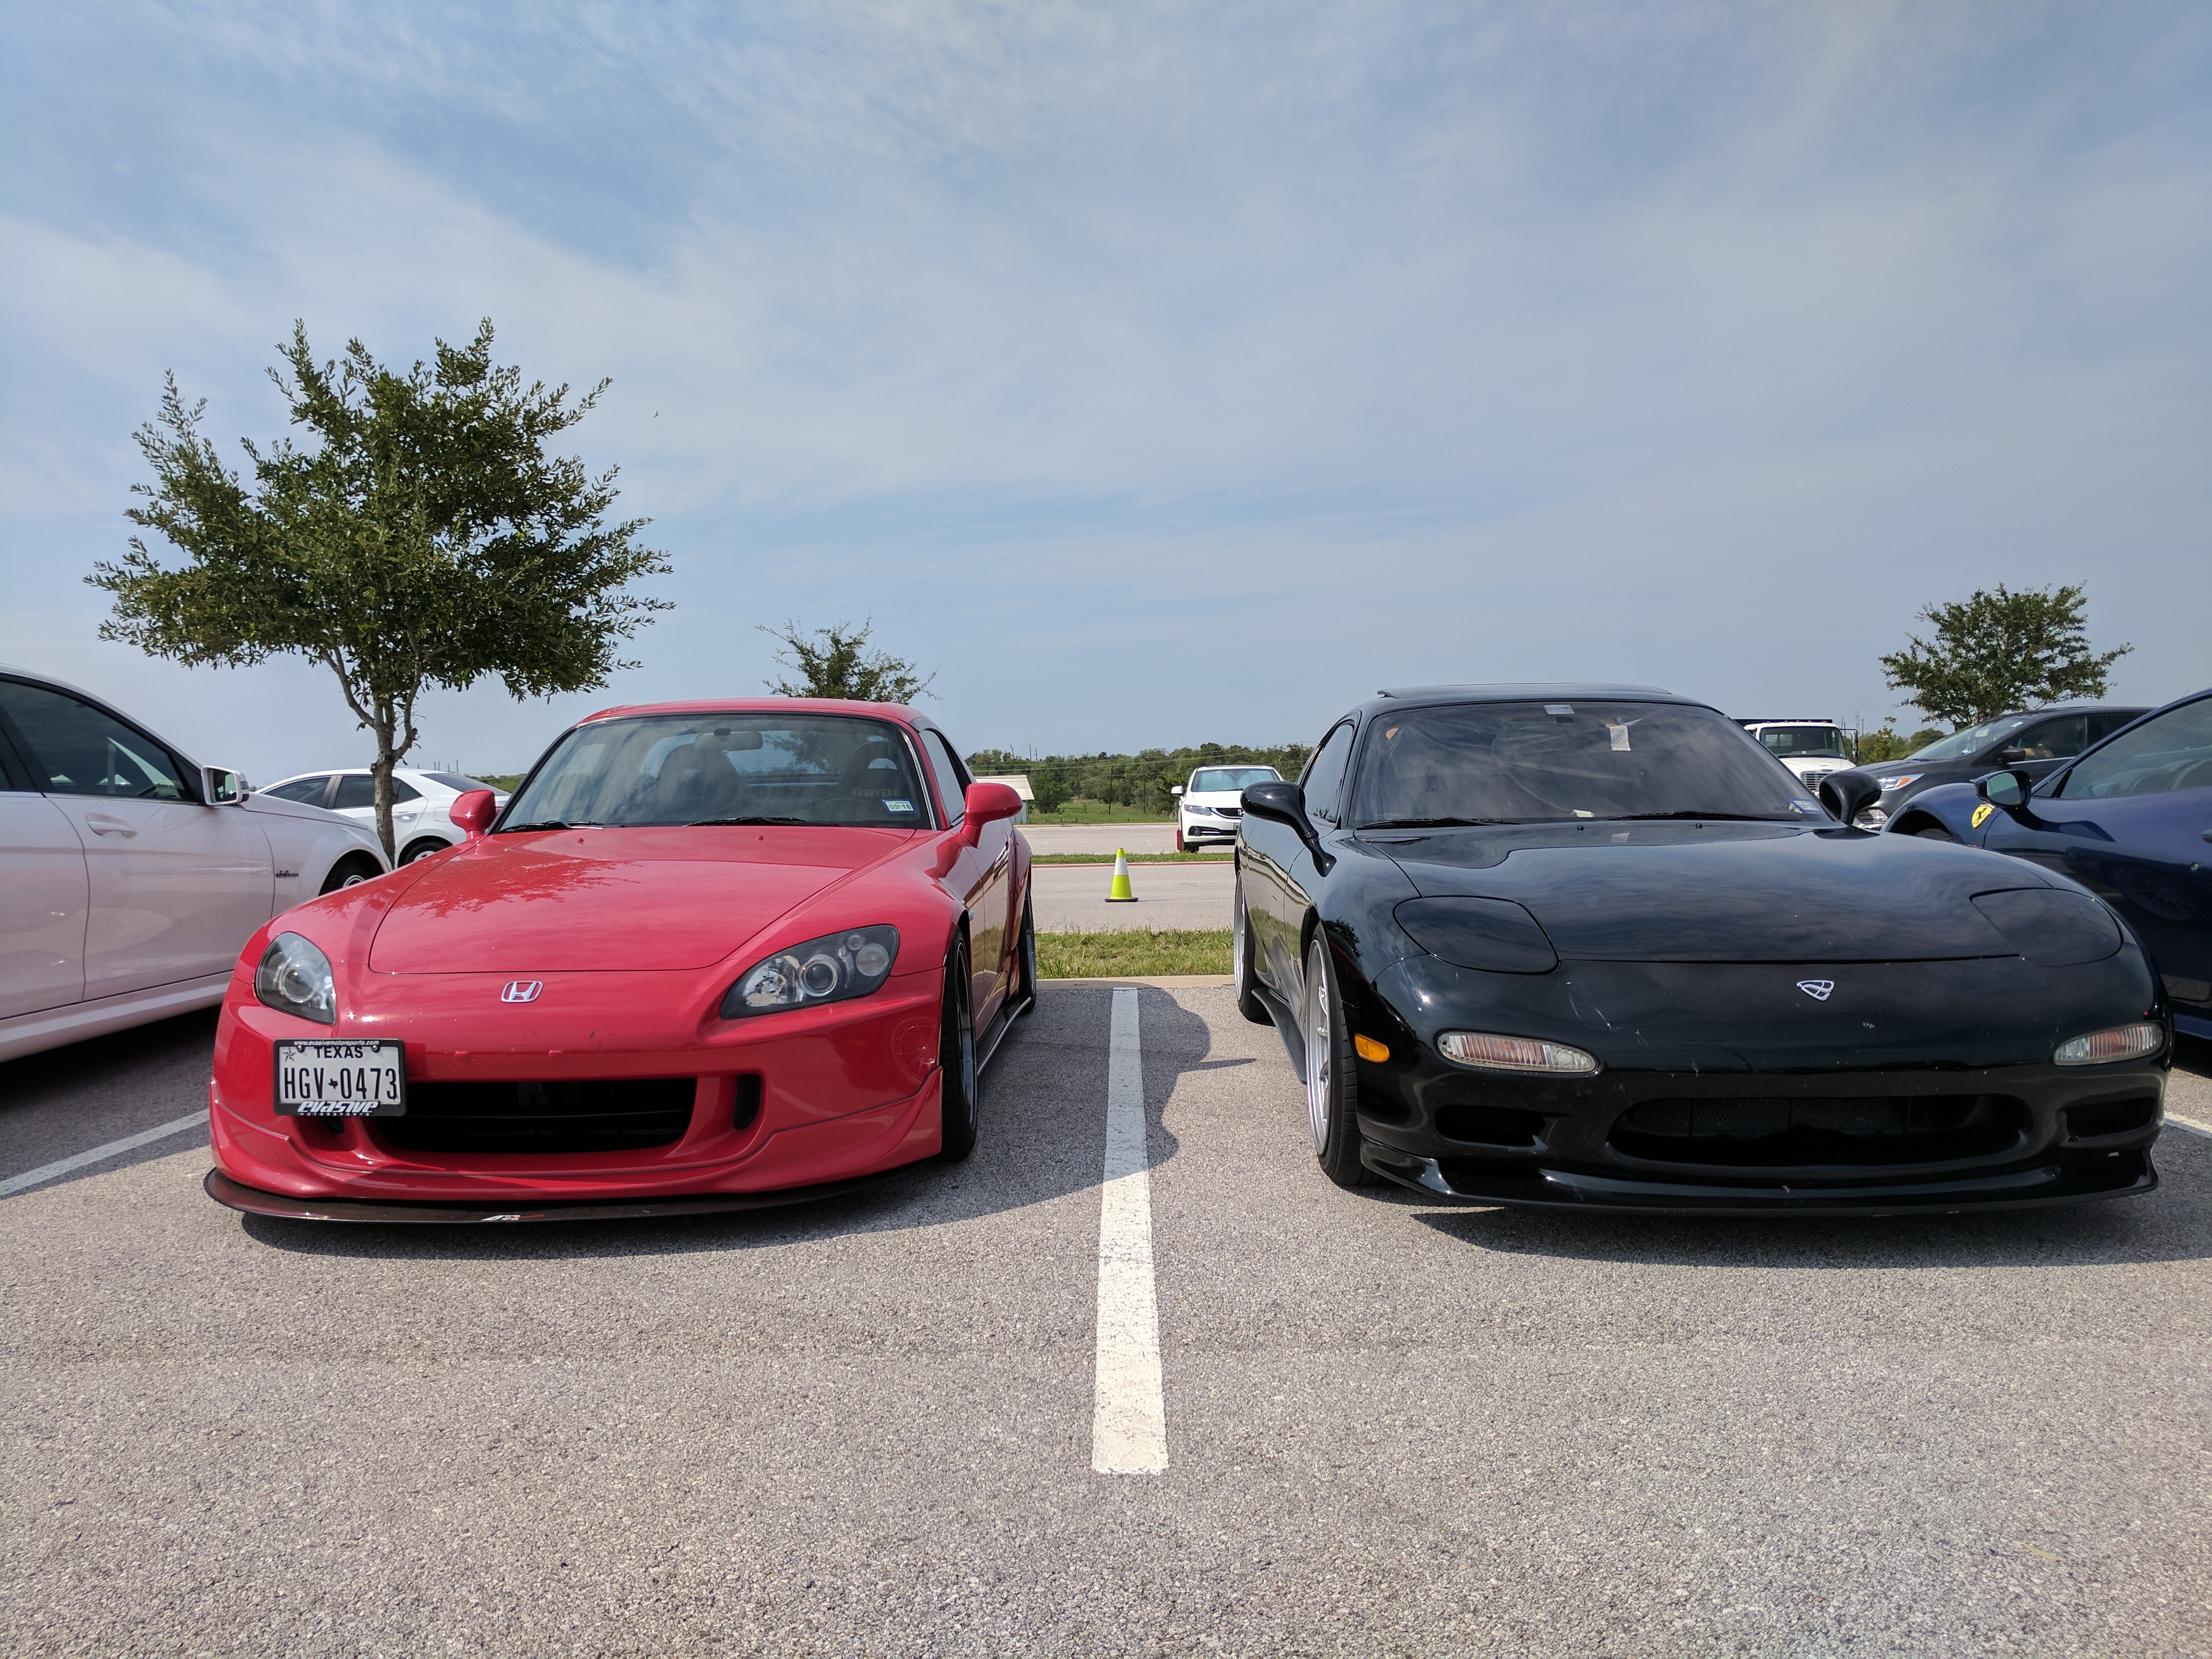 Two takes on the light weight, high RPM sports car.